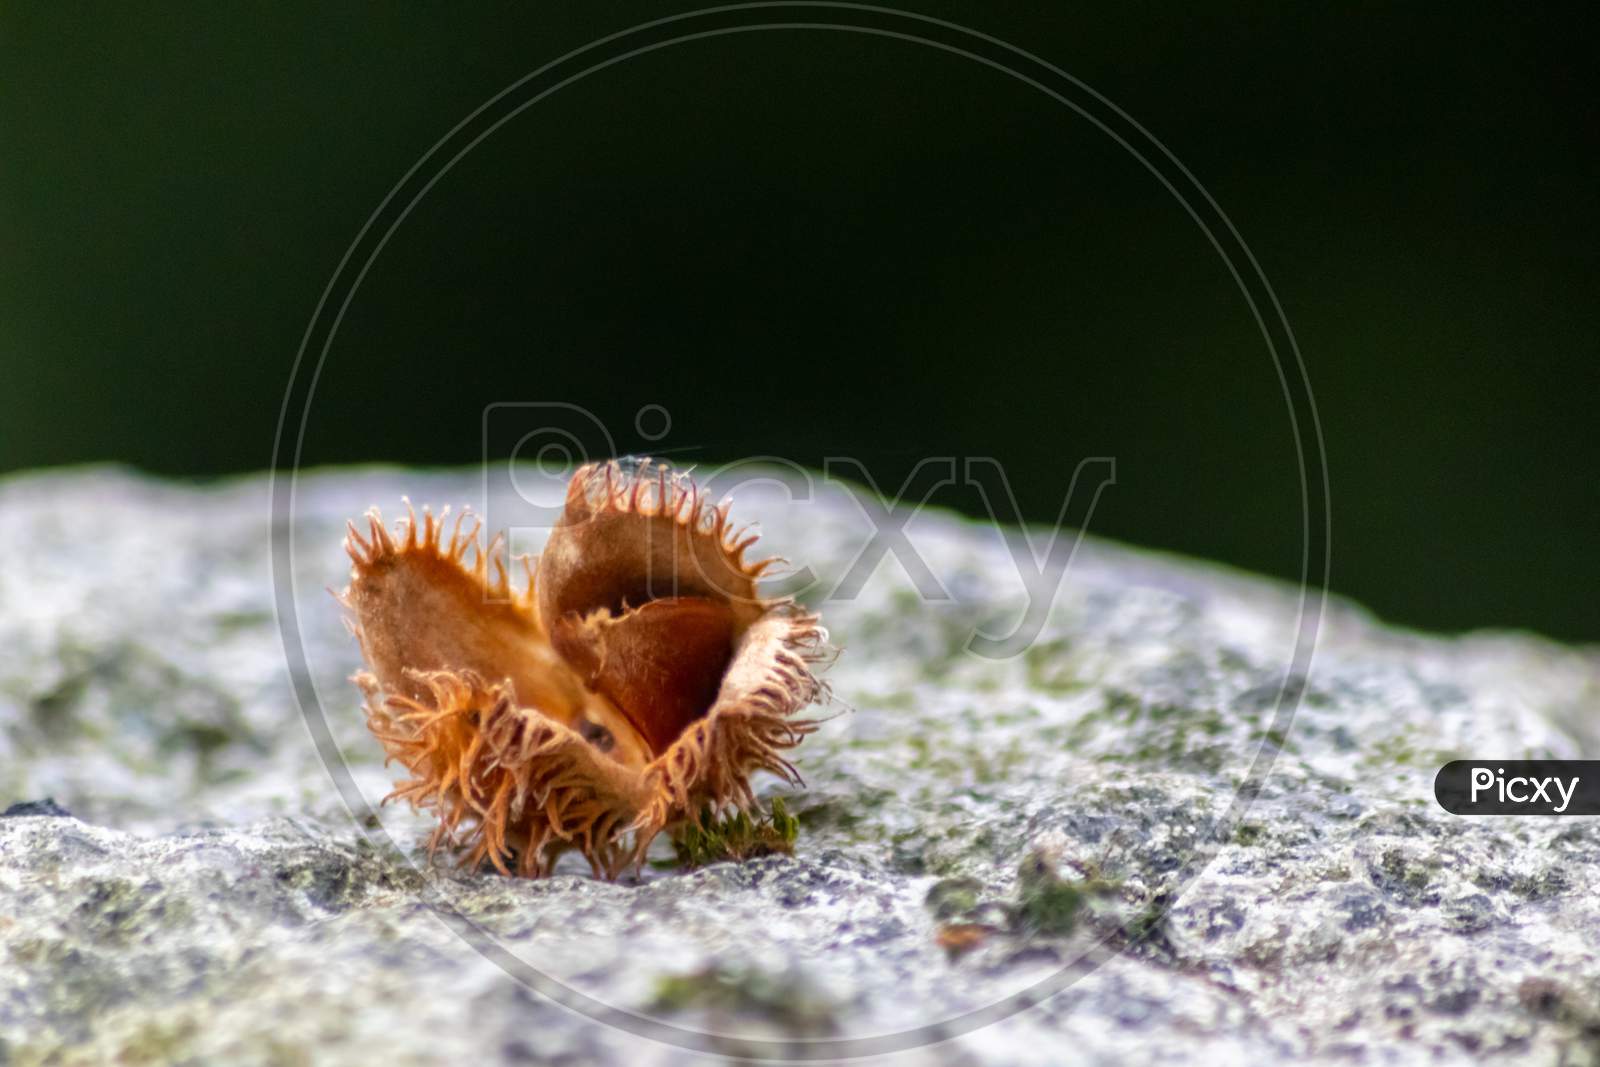 Beech nut macro in fall and autumn as seasonal forest fruit with spiky nutshell and delicious nut seeds as harvest for animal feed in forests and woods tasty snack on outdoor hiking adventures